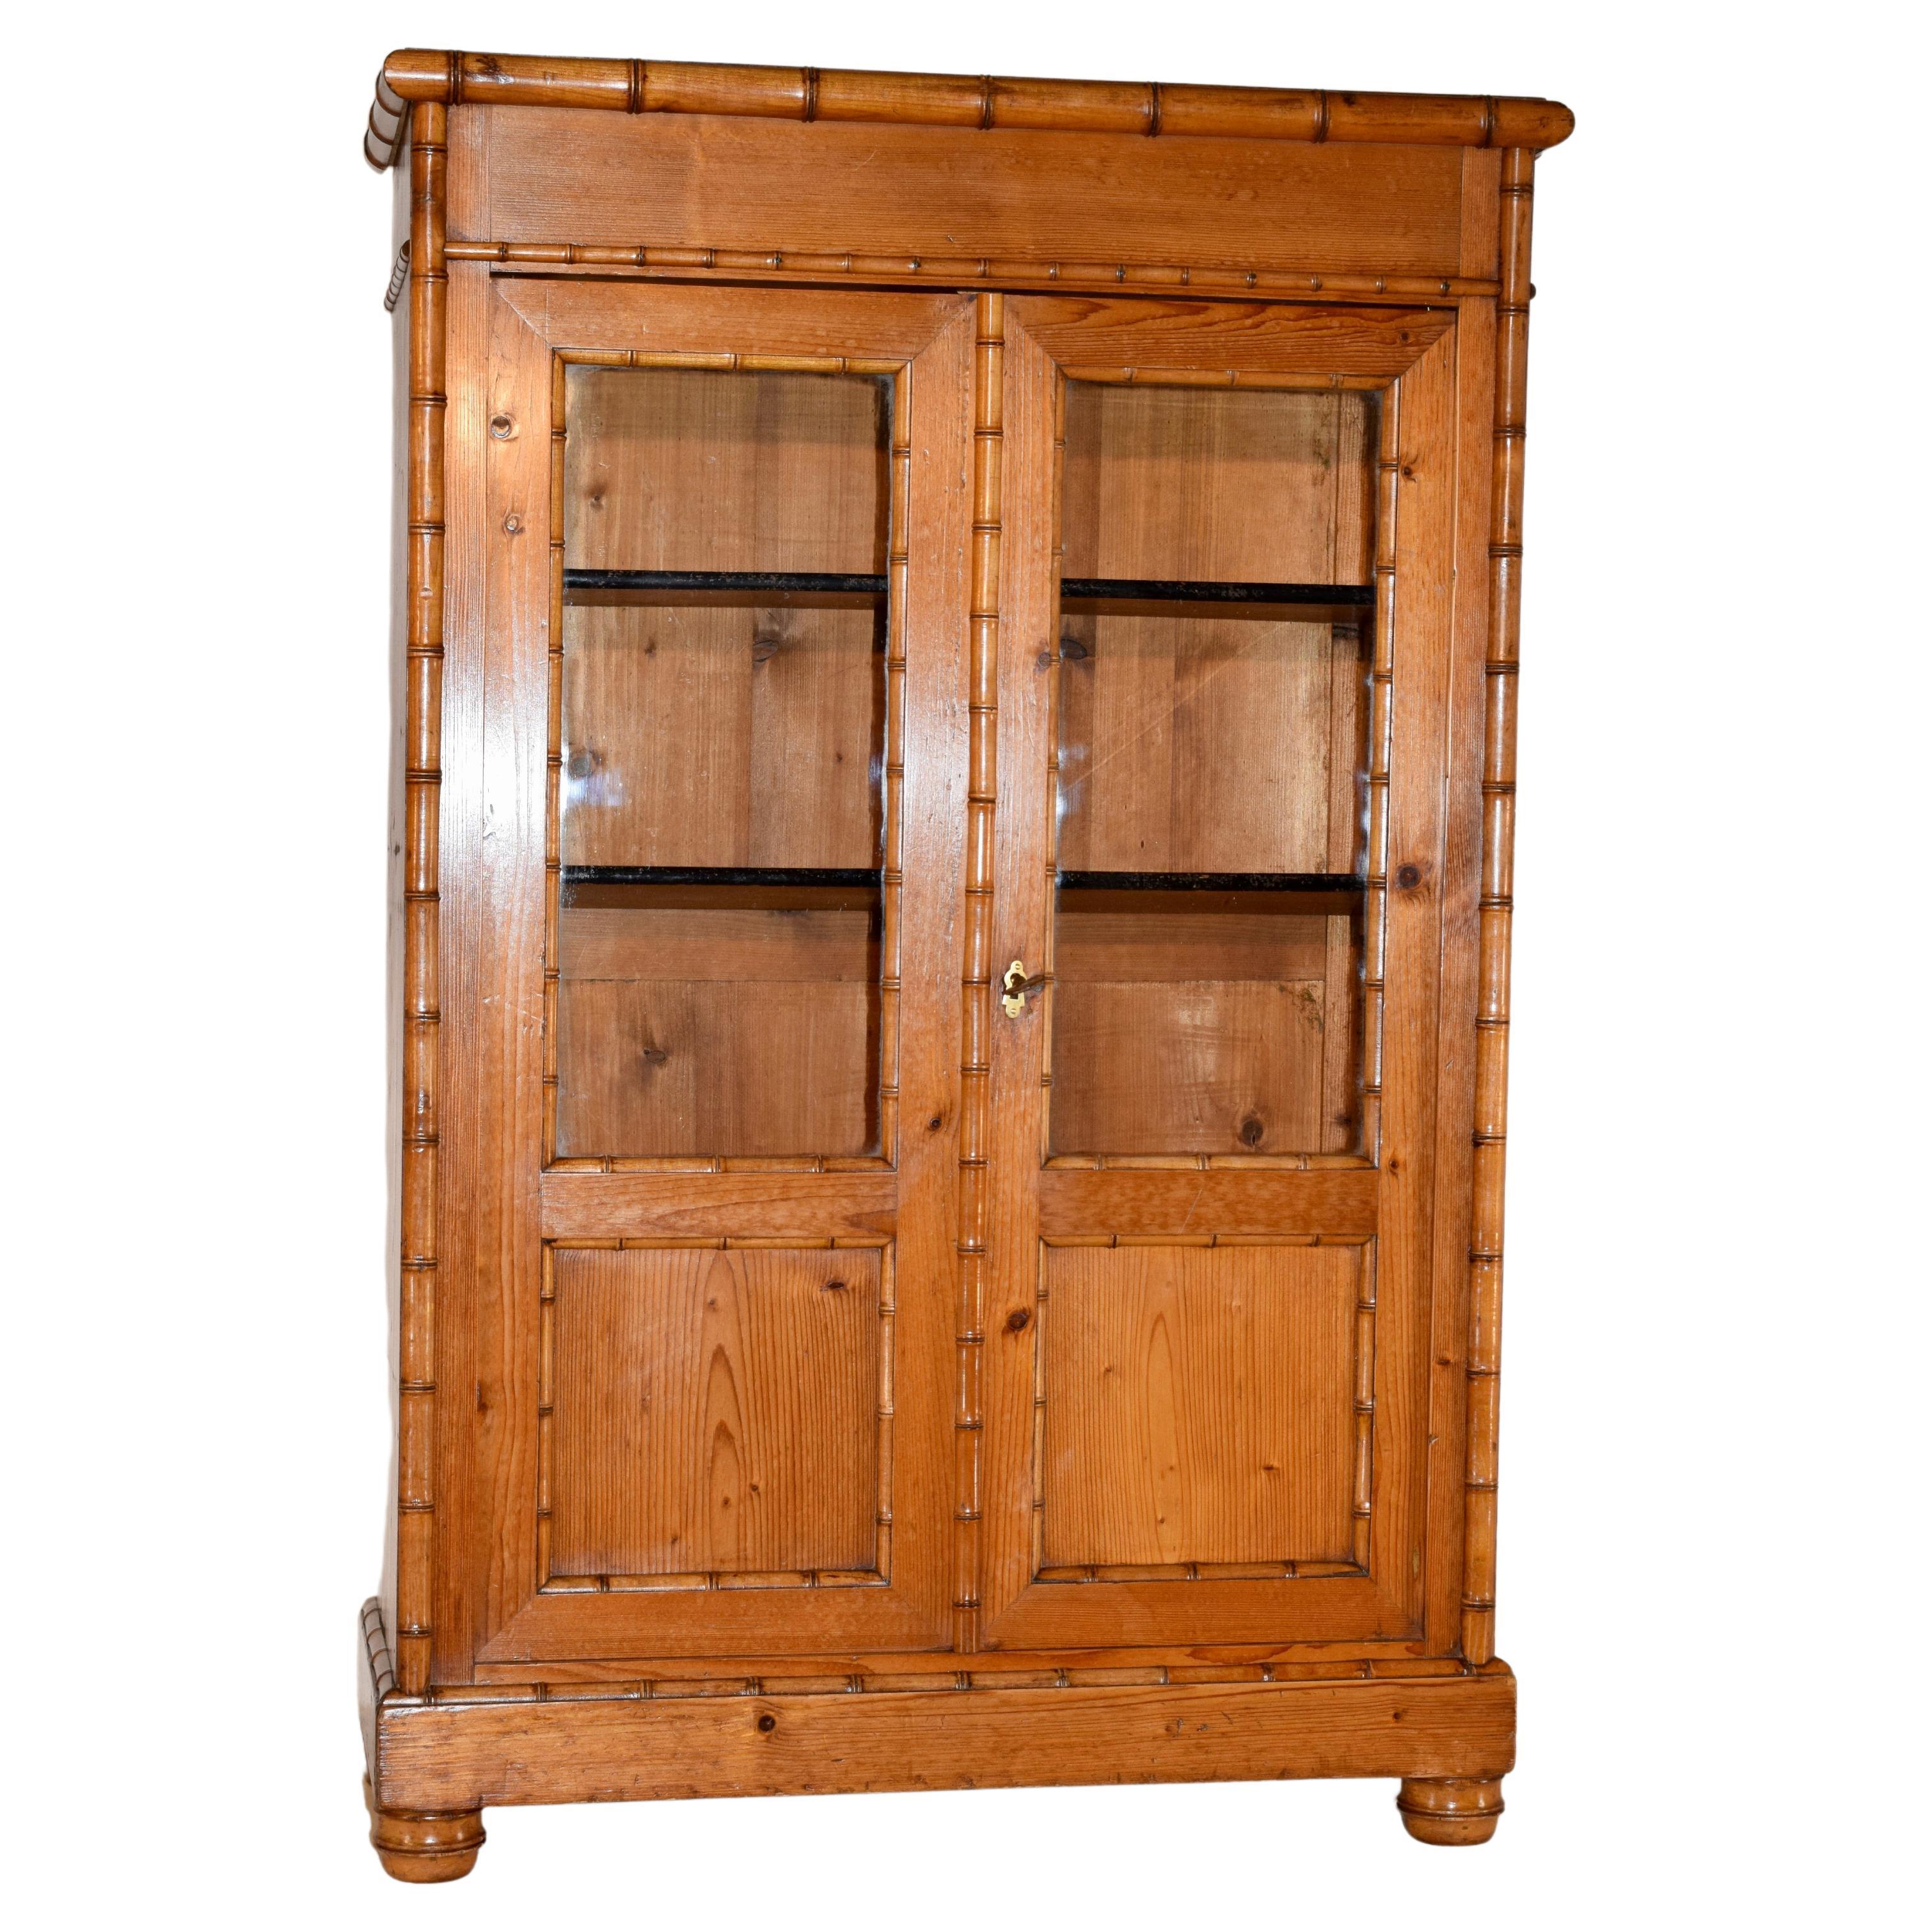 19th century small faux bamboo bookcase from France. The cabinet is made from pine and has hand turned bamboo style moldings made from cherry. The cabinet has two doors with glass panels, which open to reveal shelving. This is a great small bookcase